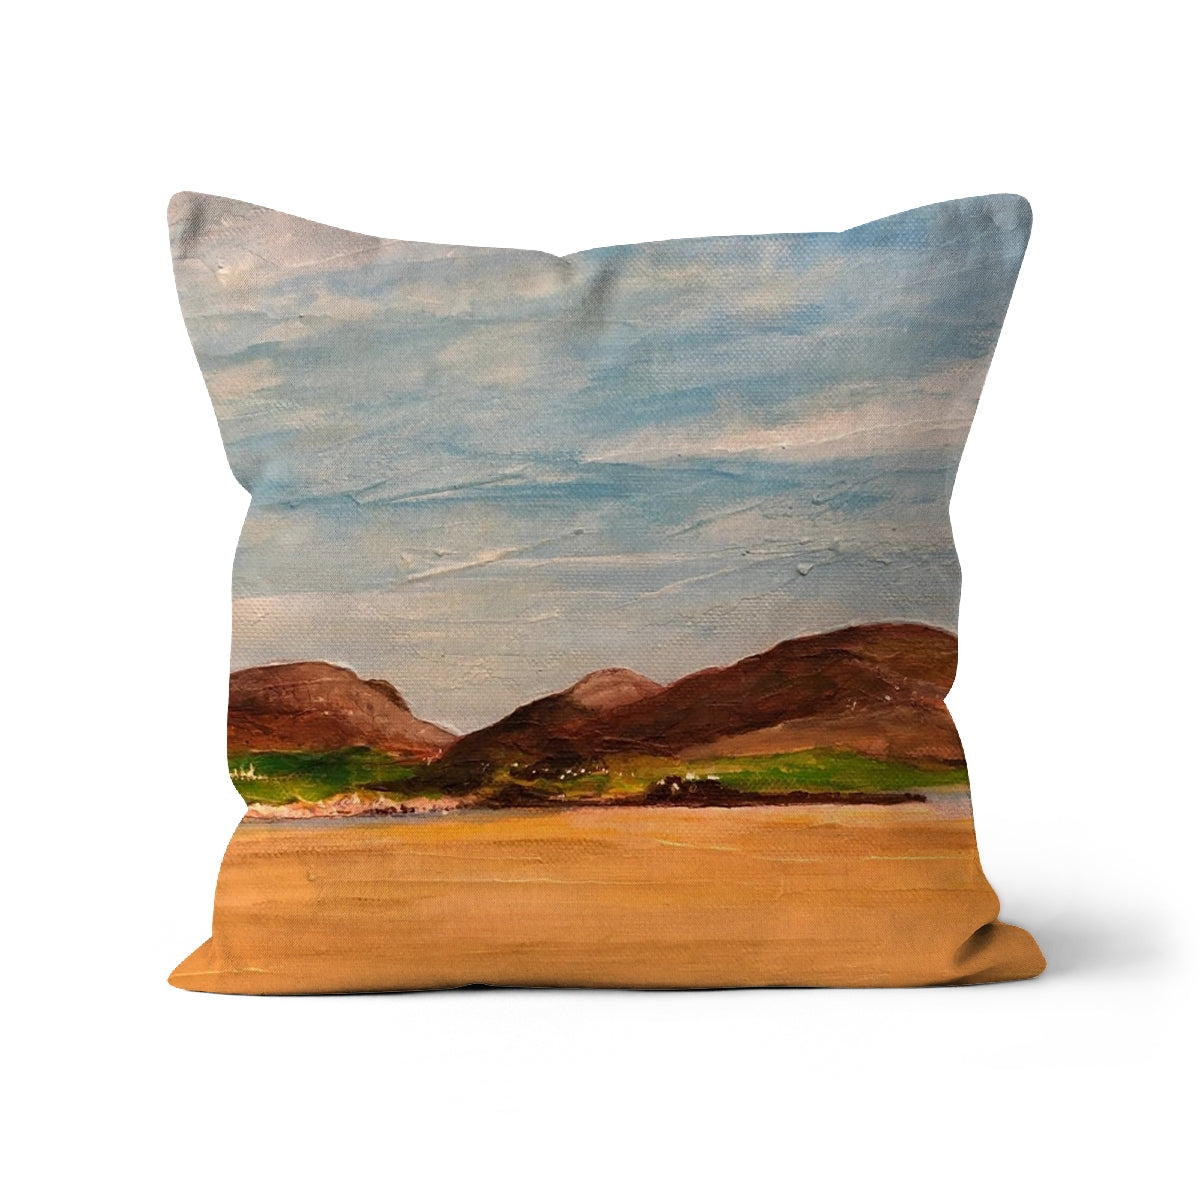 Uig Sands Lewis Art Gifts Cushion-Cushions-Hebridean Islands Art Gallery-Linen-12"x12"-Paintings, Prints, Homeware, Art Gifts From Scotland By Scottish Artist Kevin Hunter